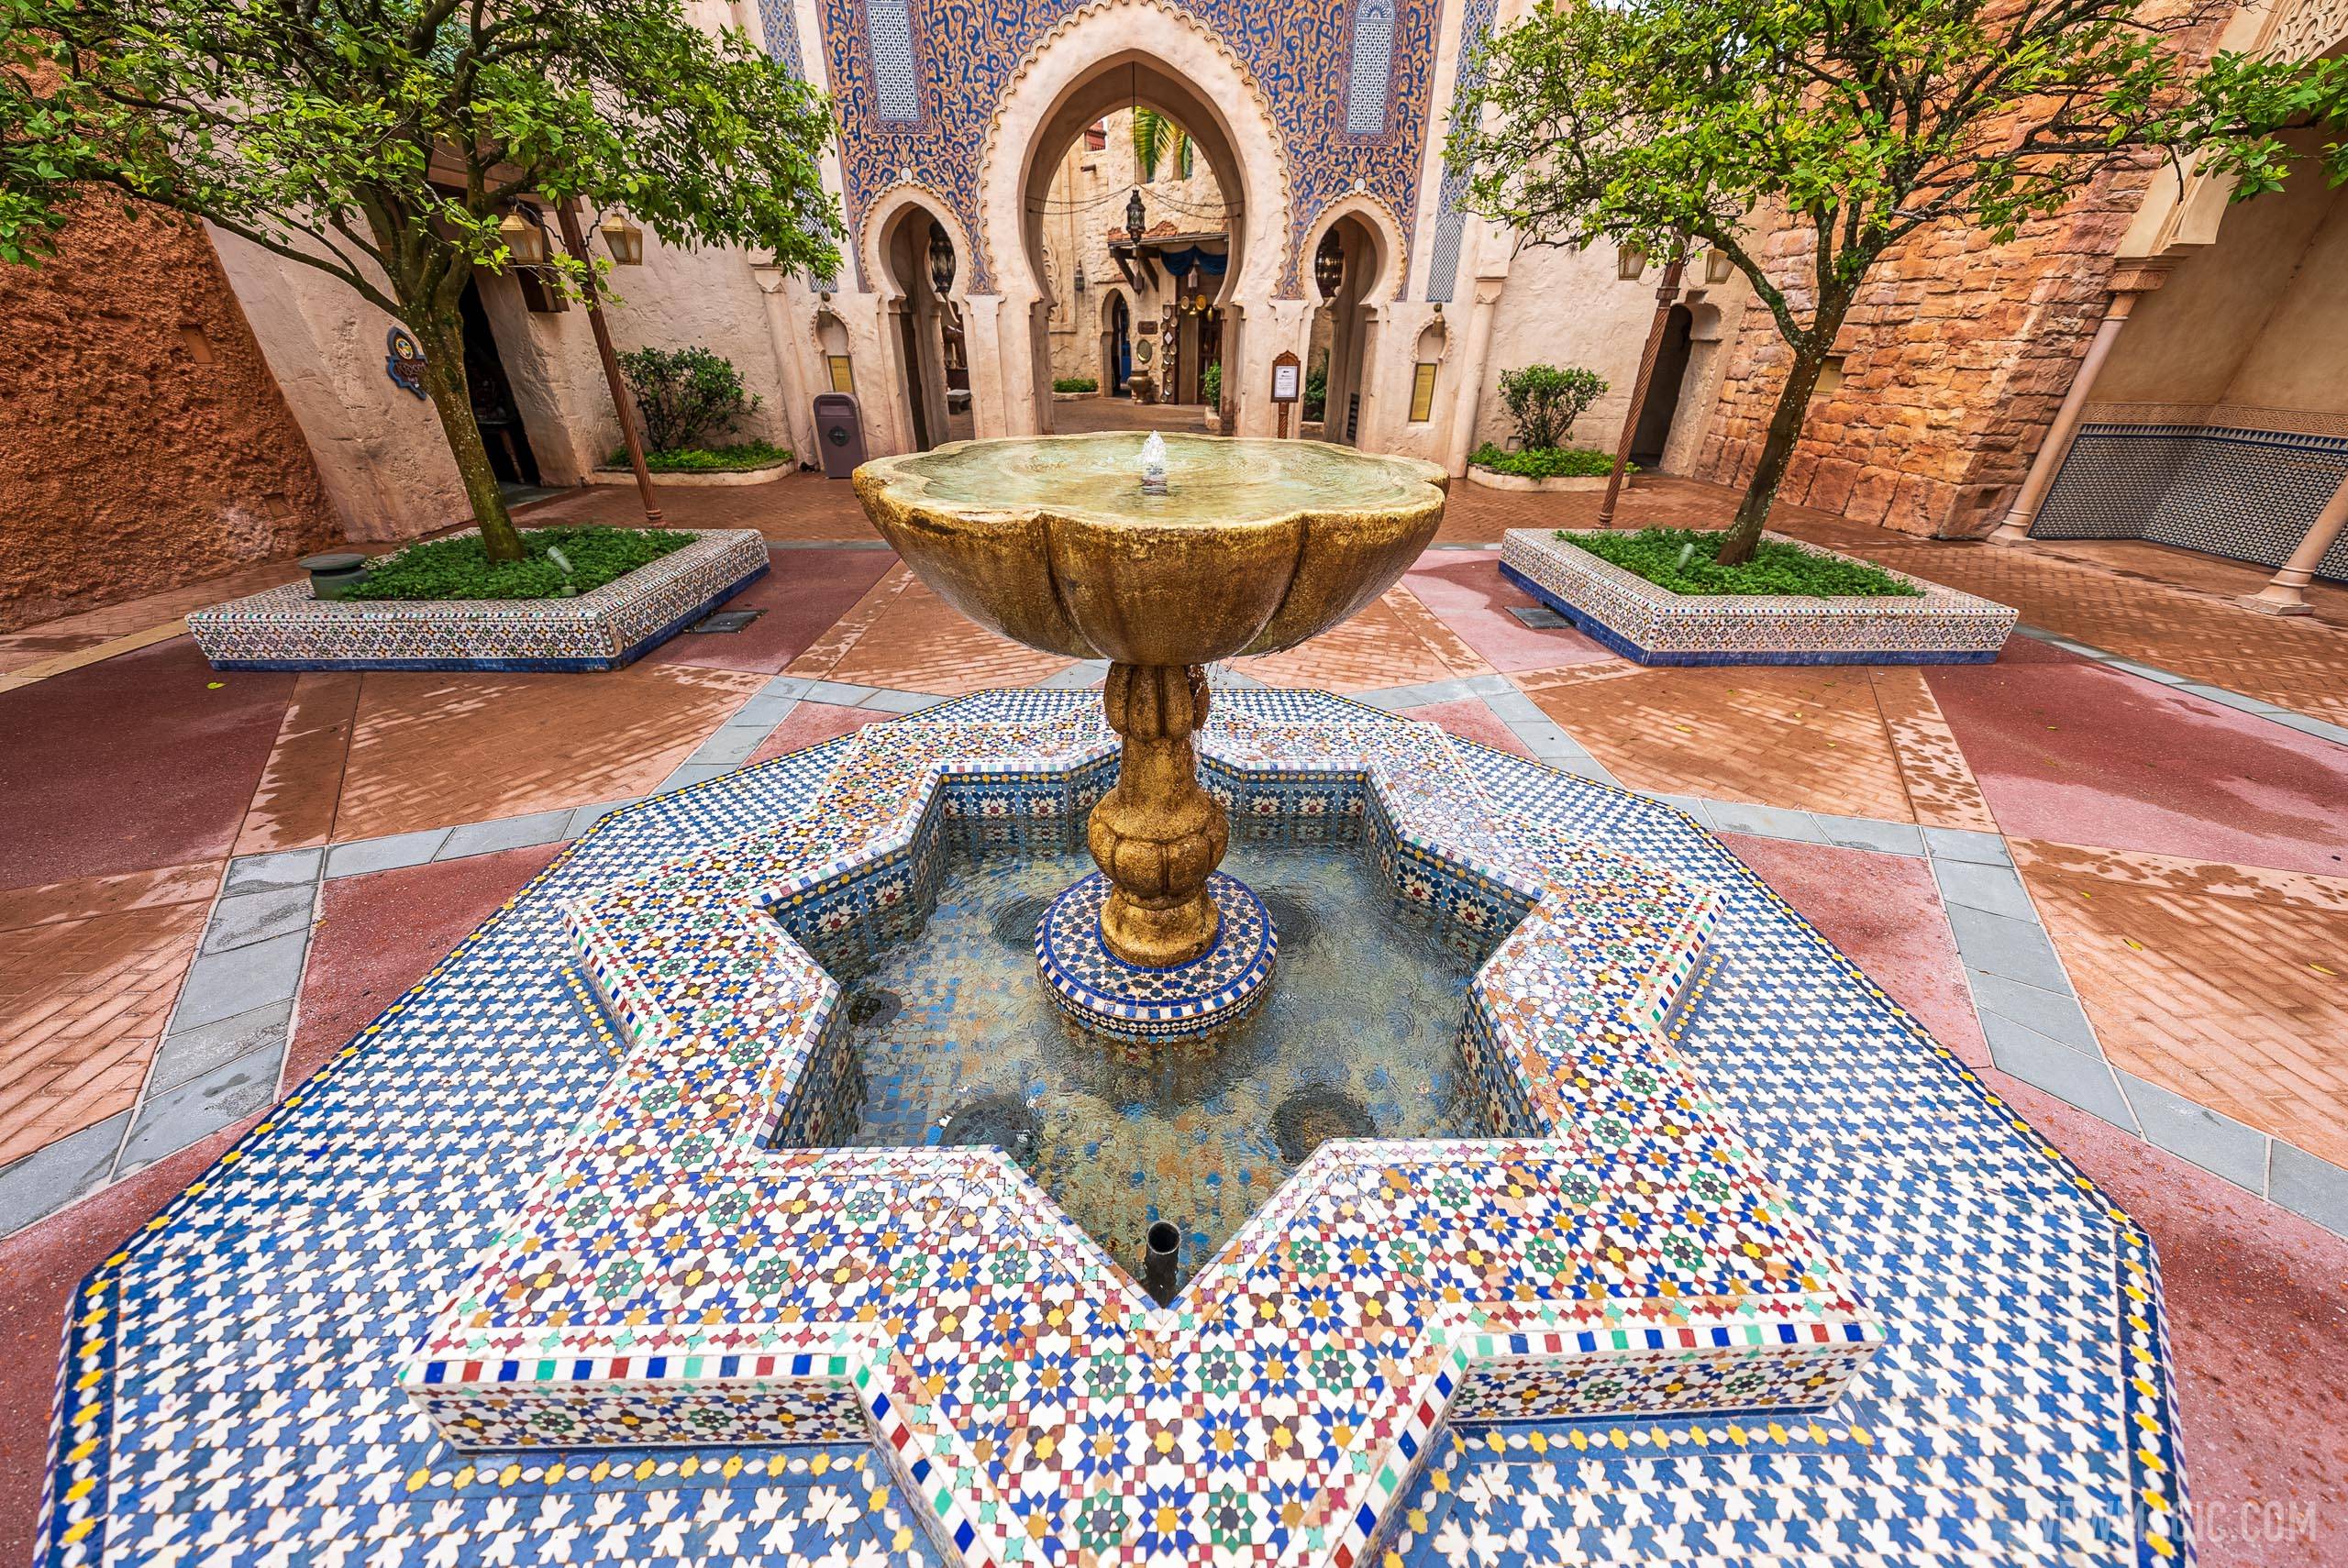 A look at the completed central courtyard at EPCOT'S Morocco Pavilion